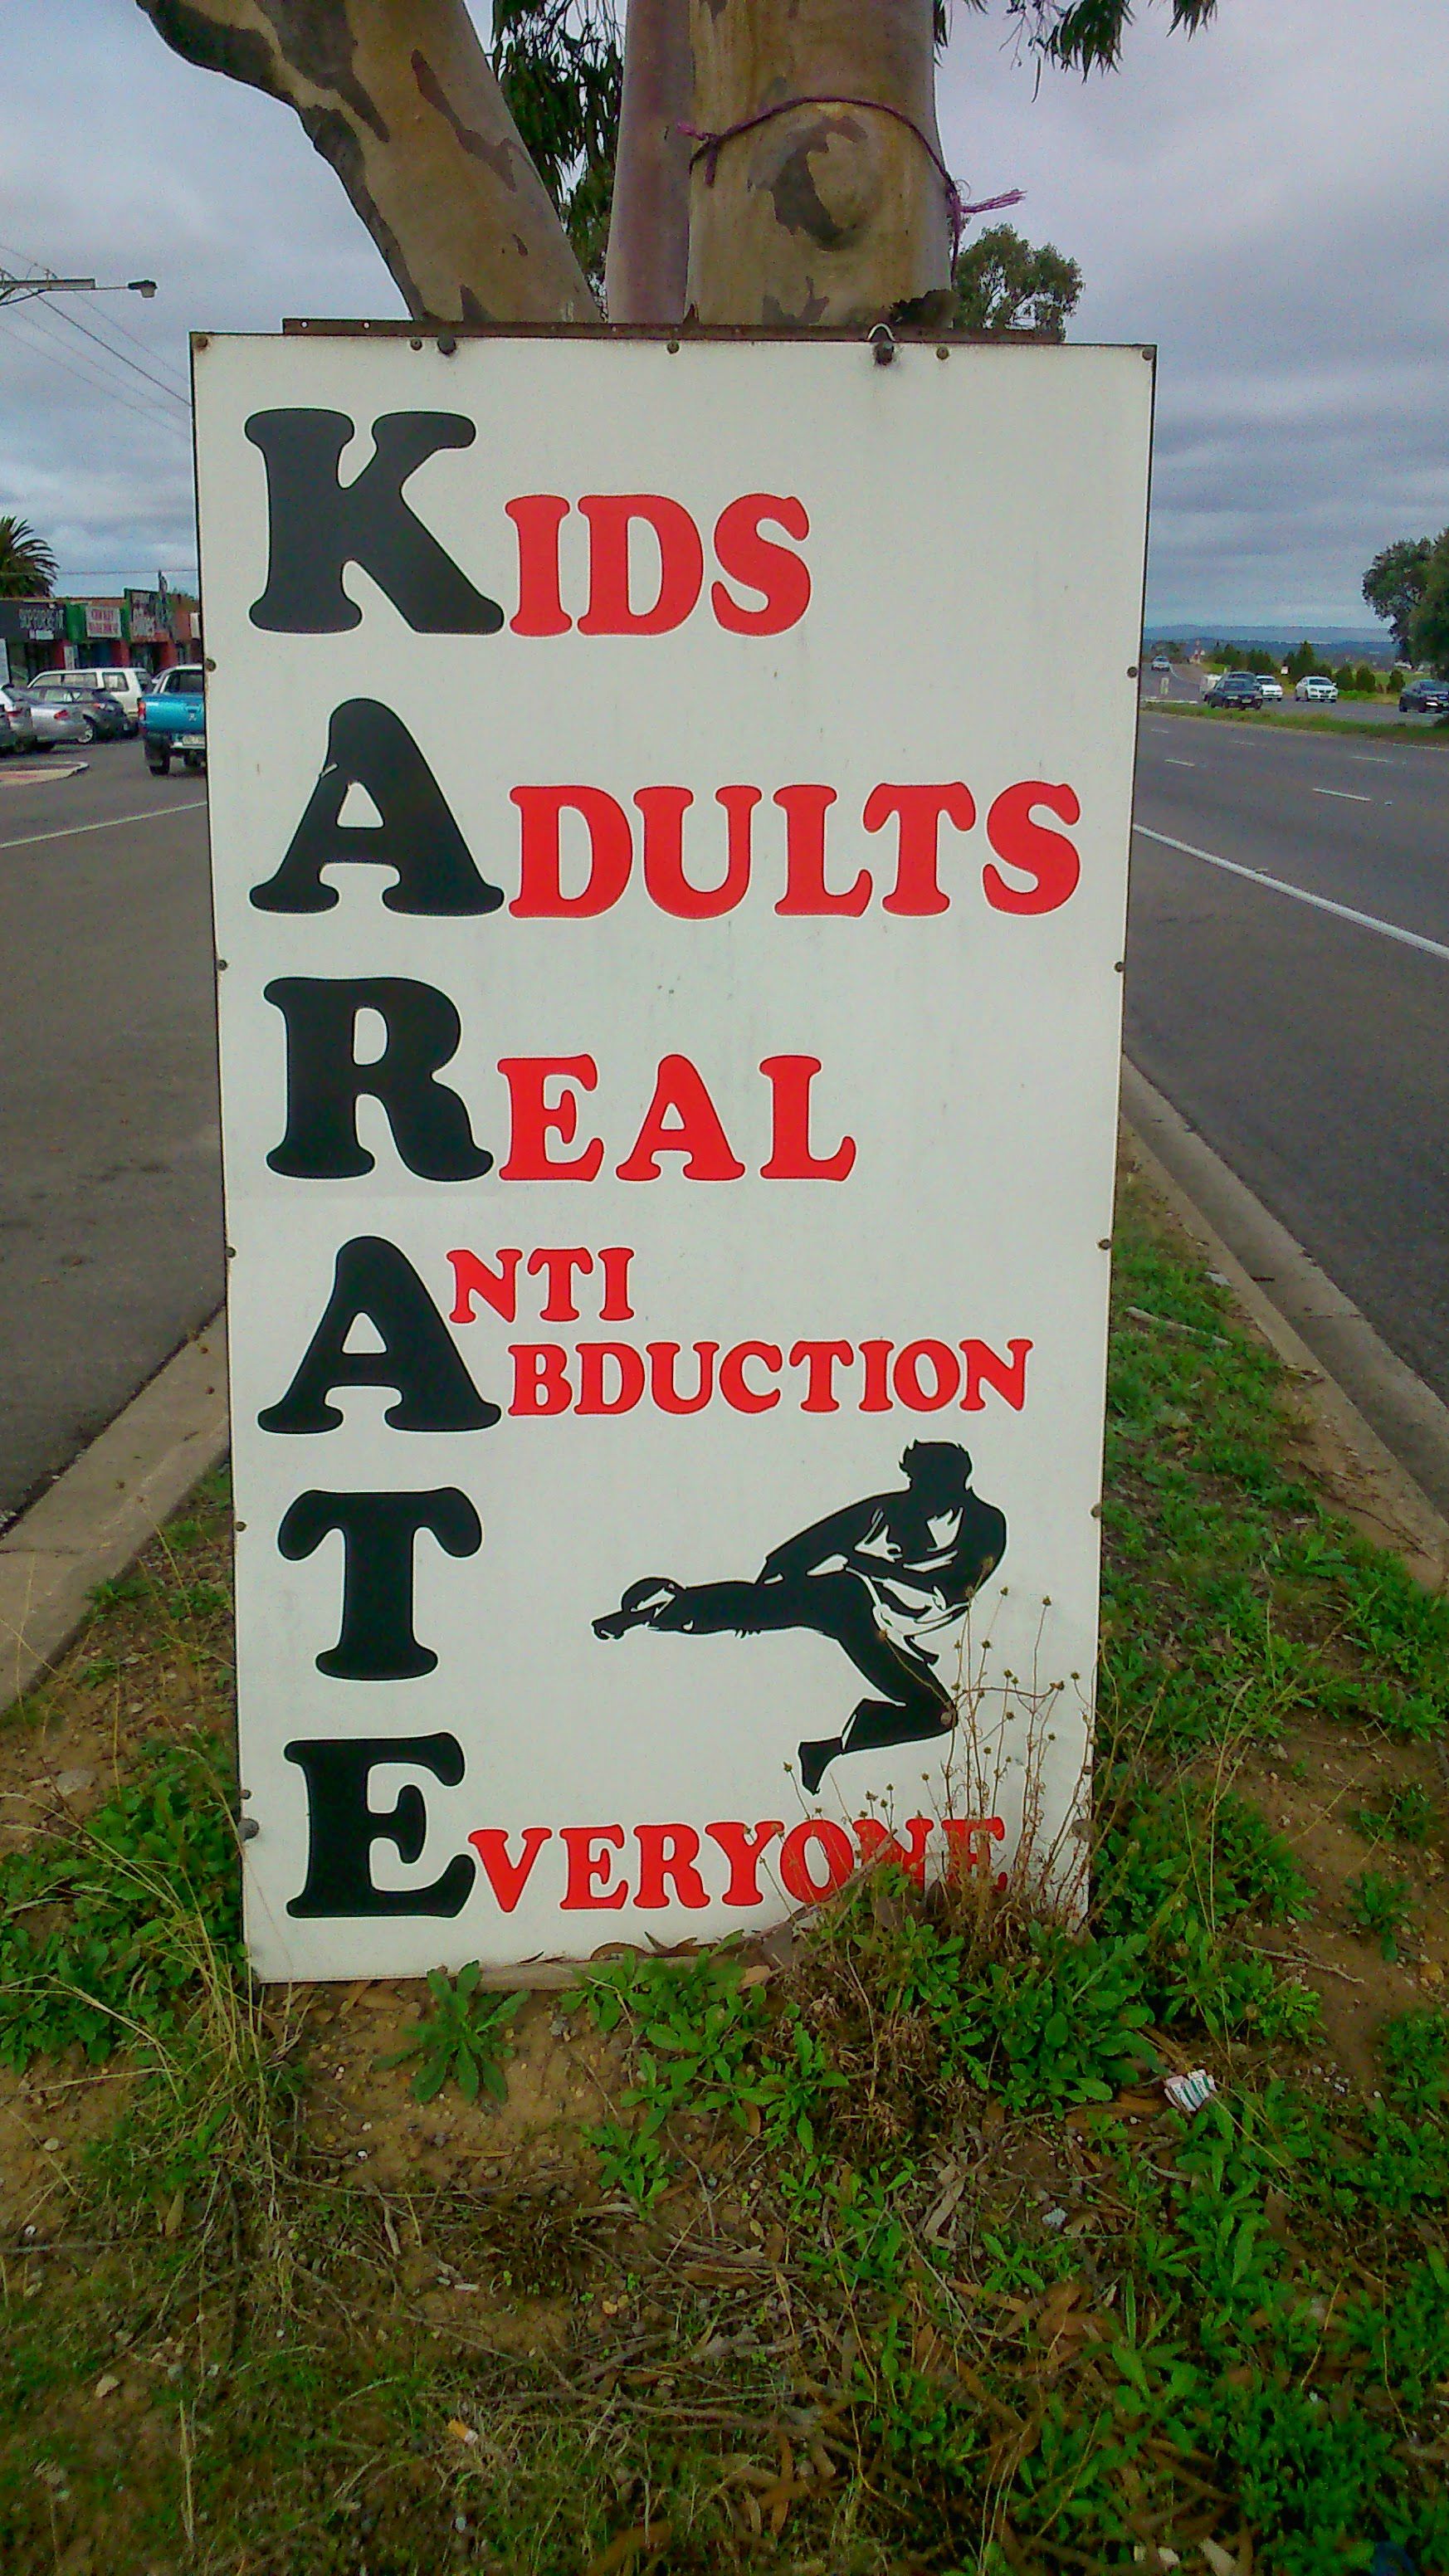 crappy design - Kids Adults Real Nti Bduction T Every